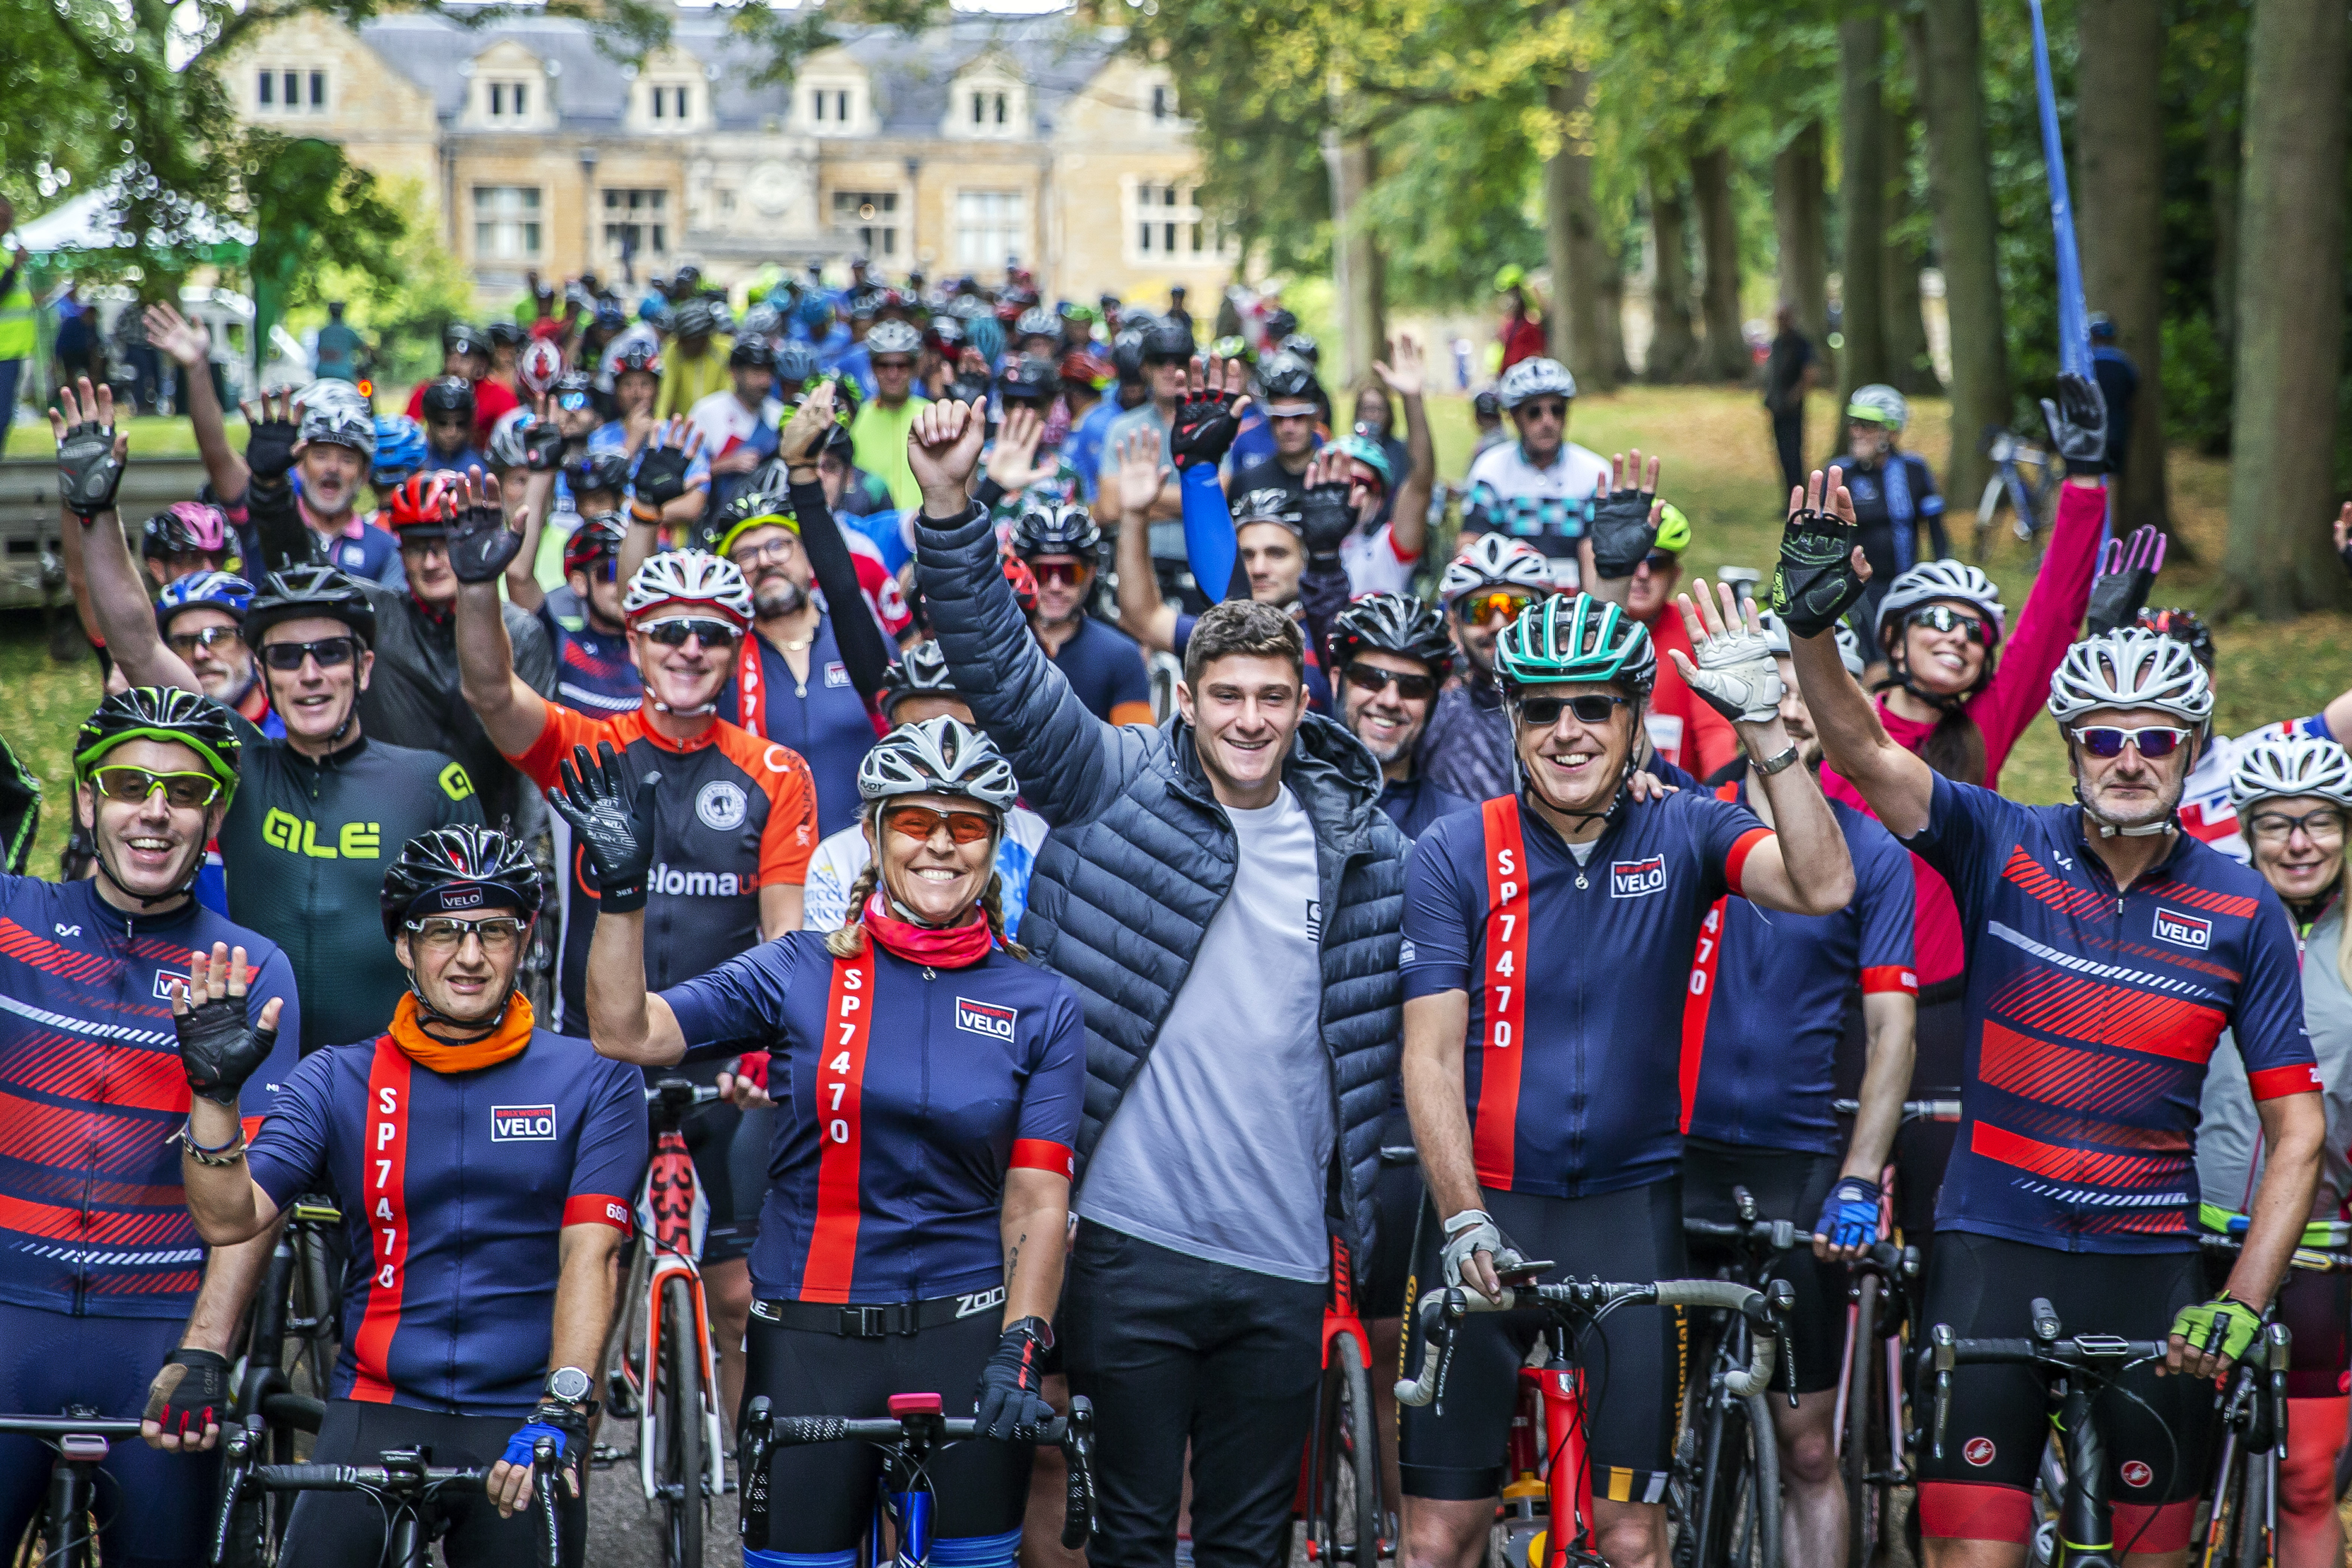 Cynthia Spencer Hospice appeals for headline sponsor for the nineteenth ‘Cycle4Cynthia